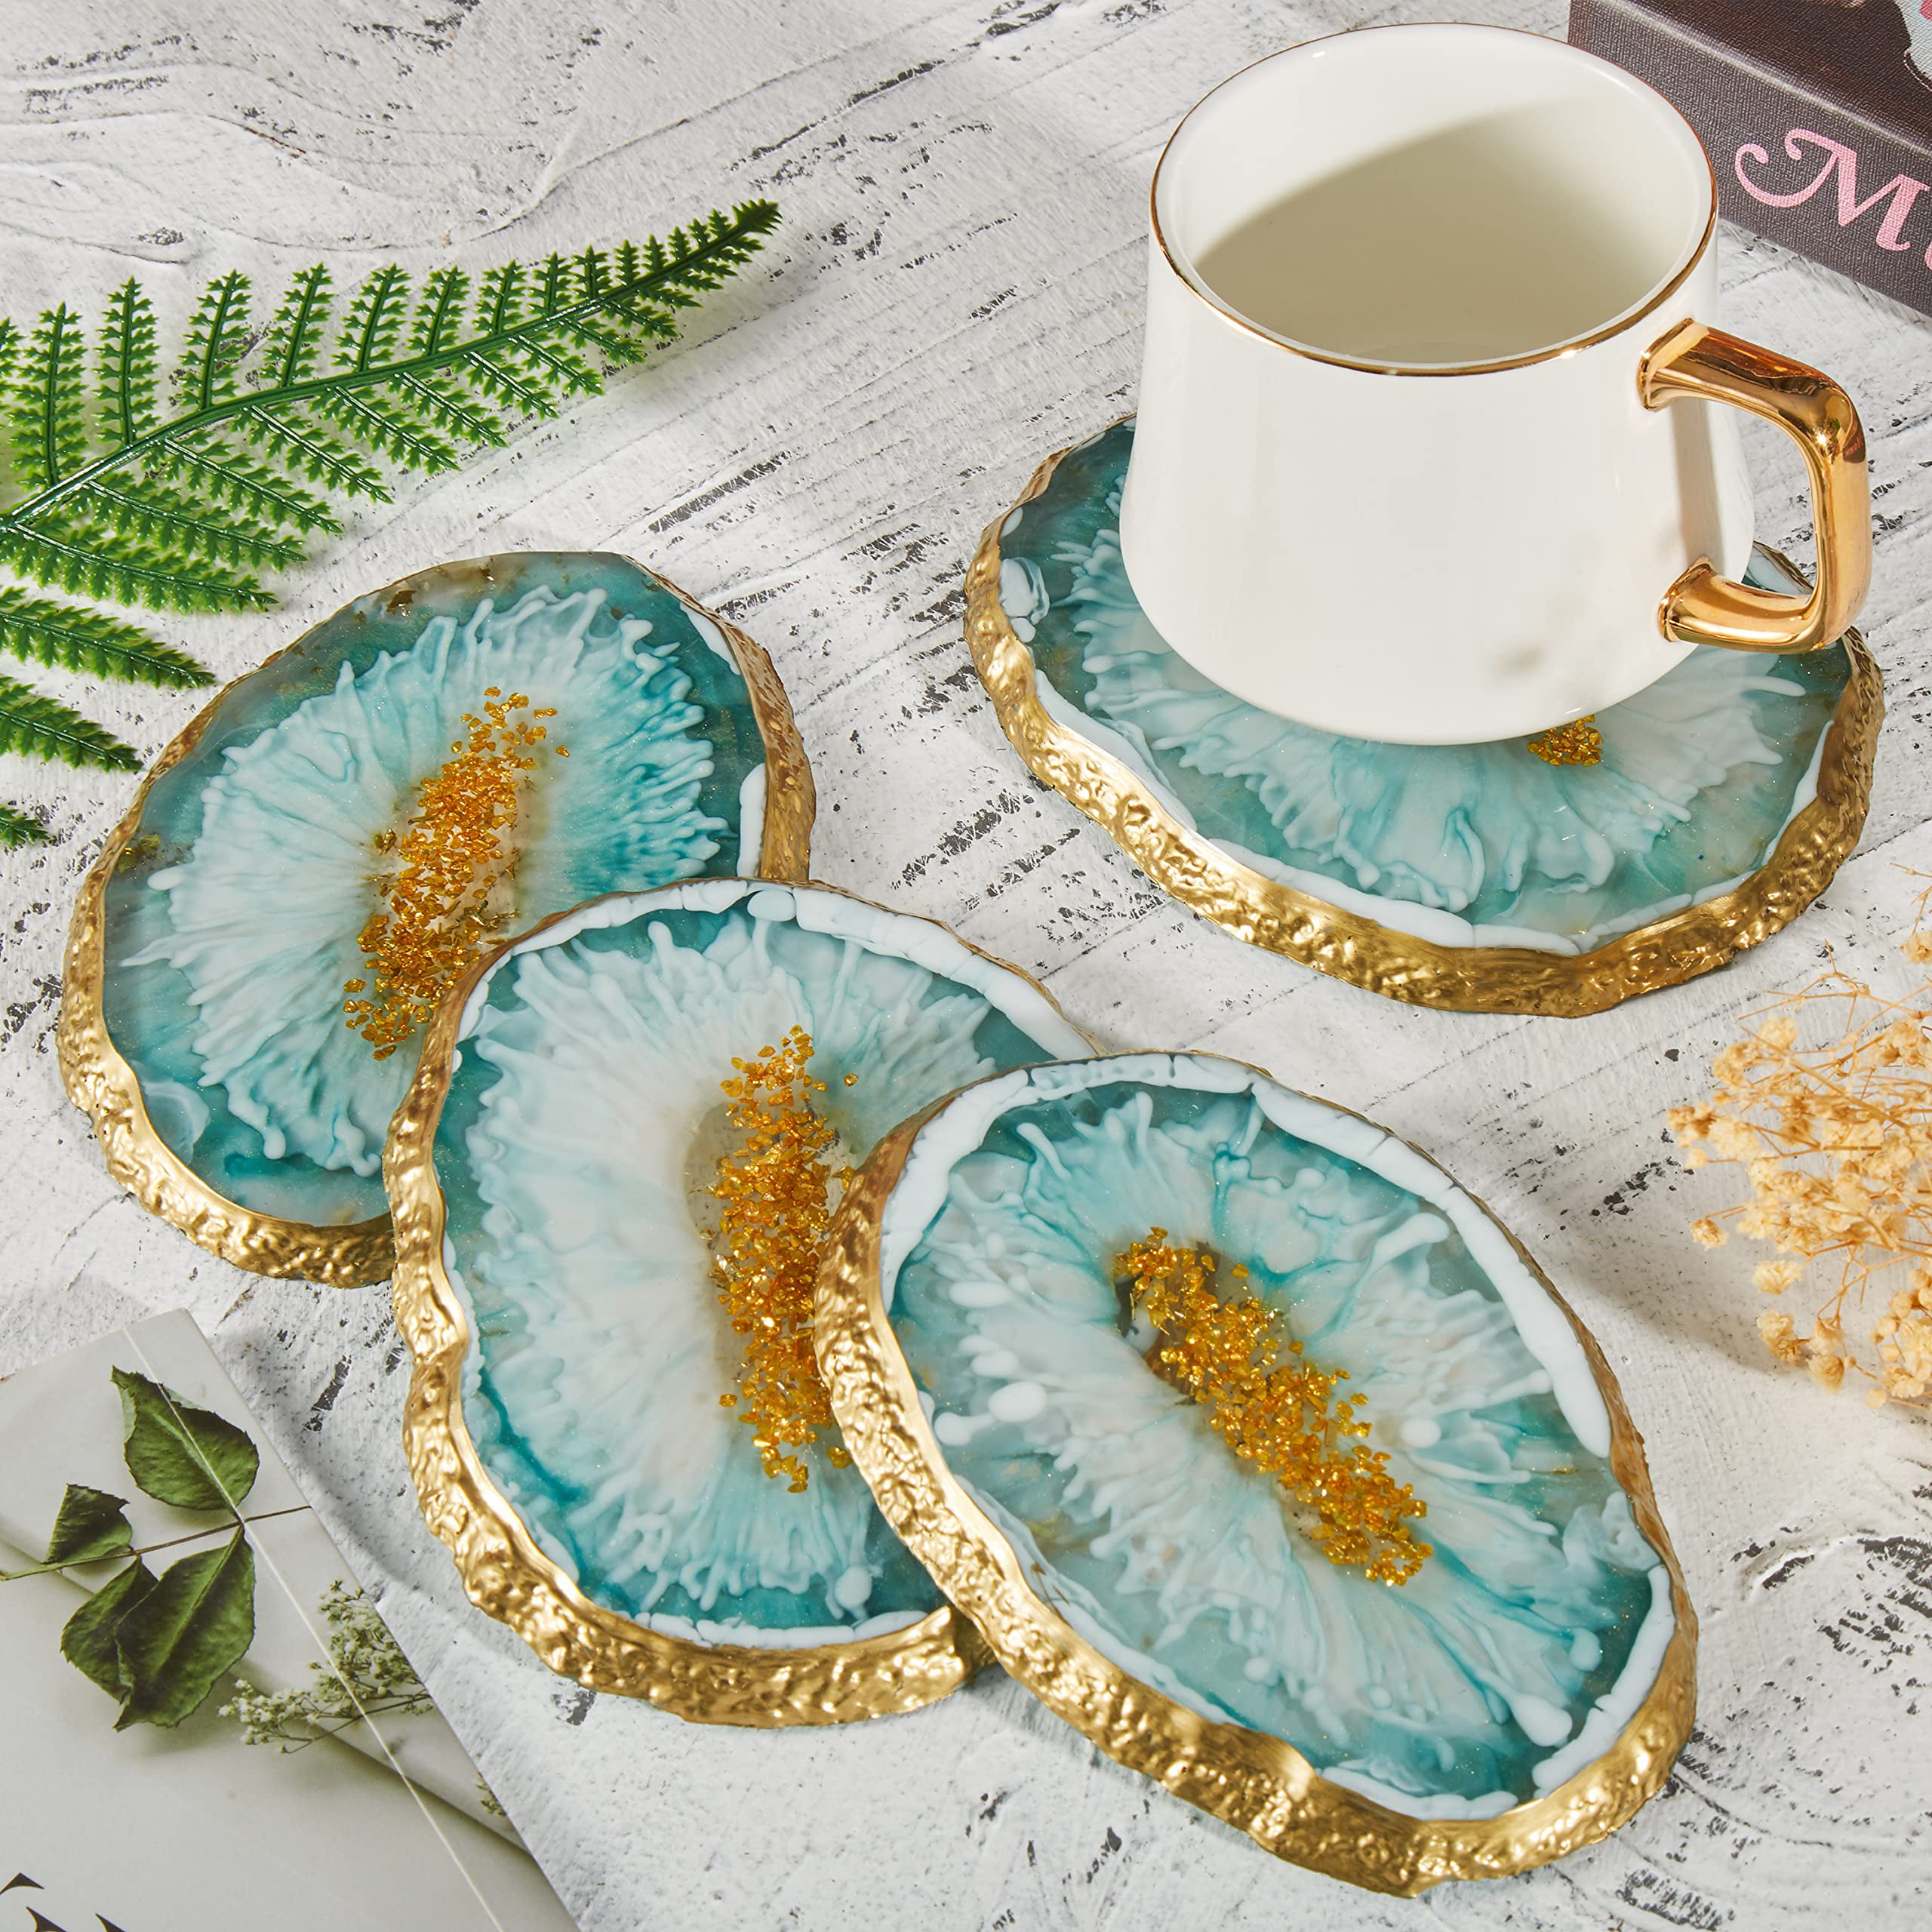 DY0173 2.5/2.8/3.3/3.9 in Geode Car Coaster Mold Agate Resin Silicone Molds  DIY Epoxy